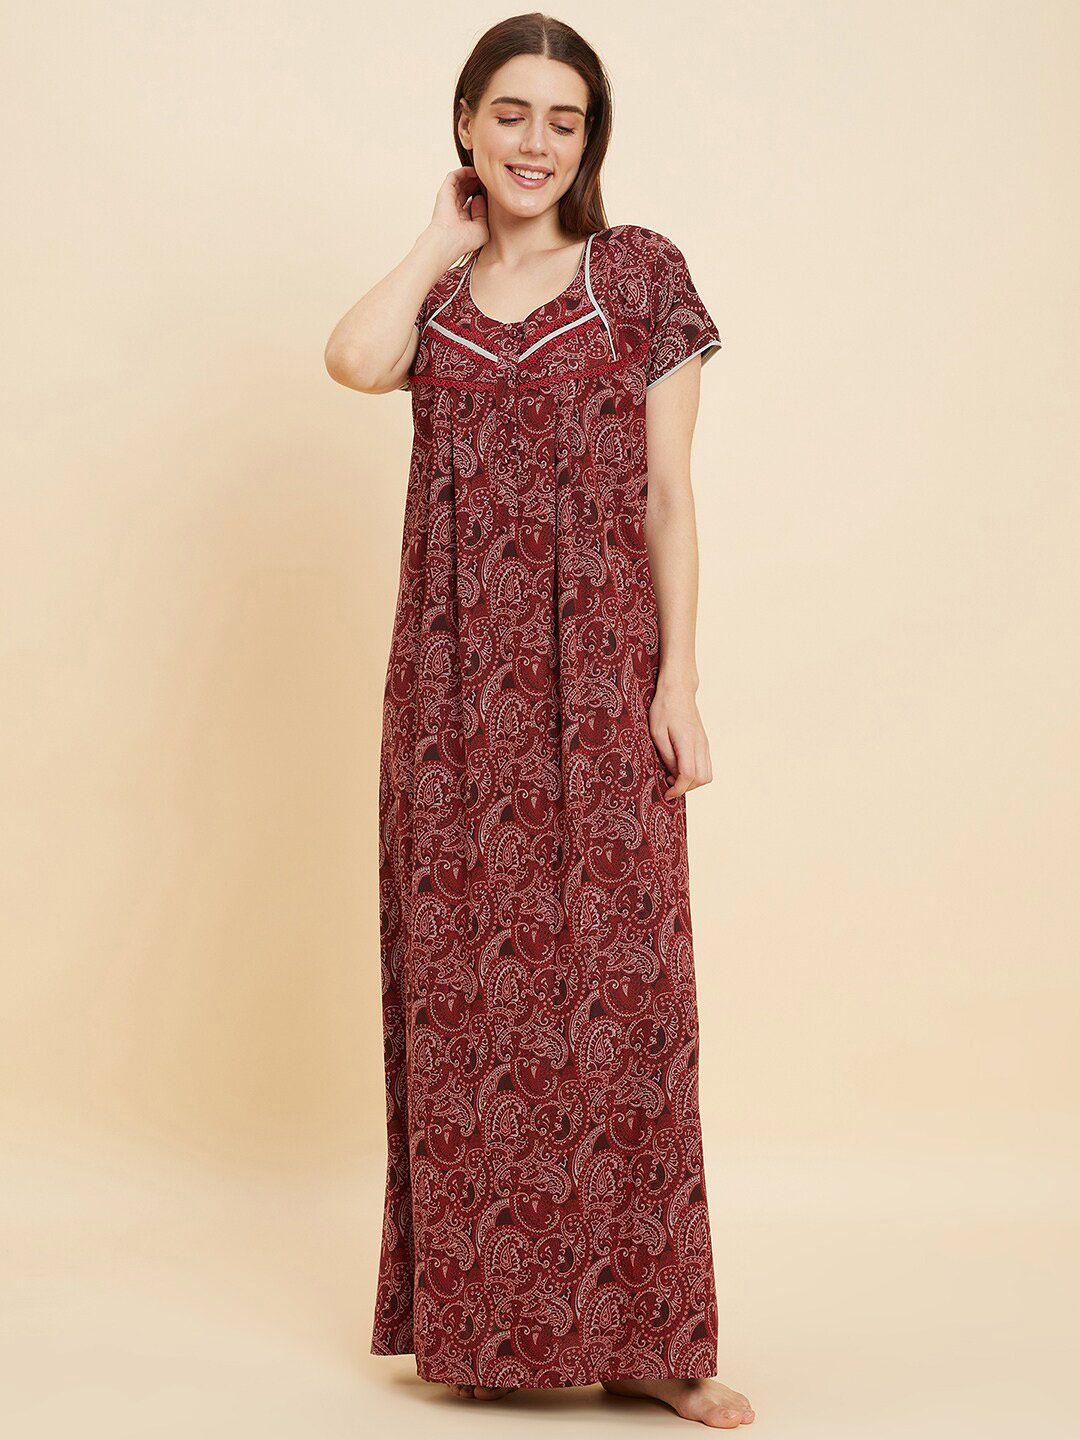 sweet-dreams-red-ethnic-motifs-printed-pure-cotton-maxi-nightdress